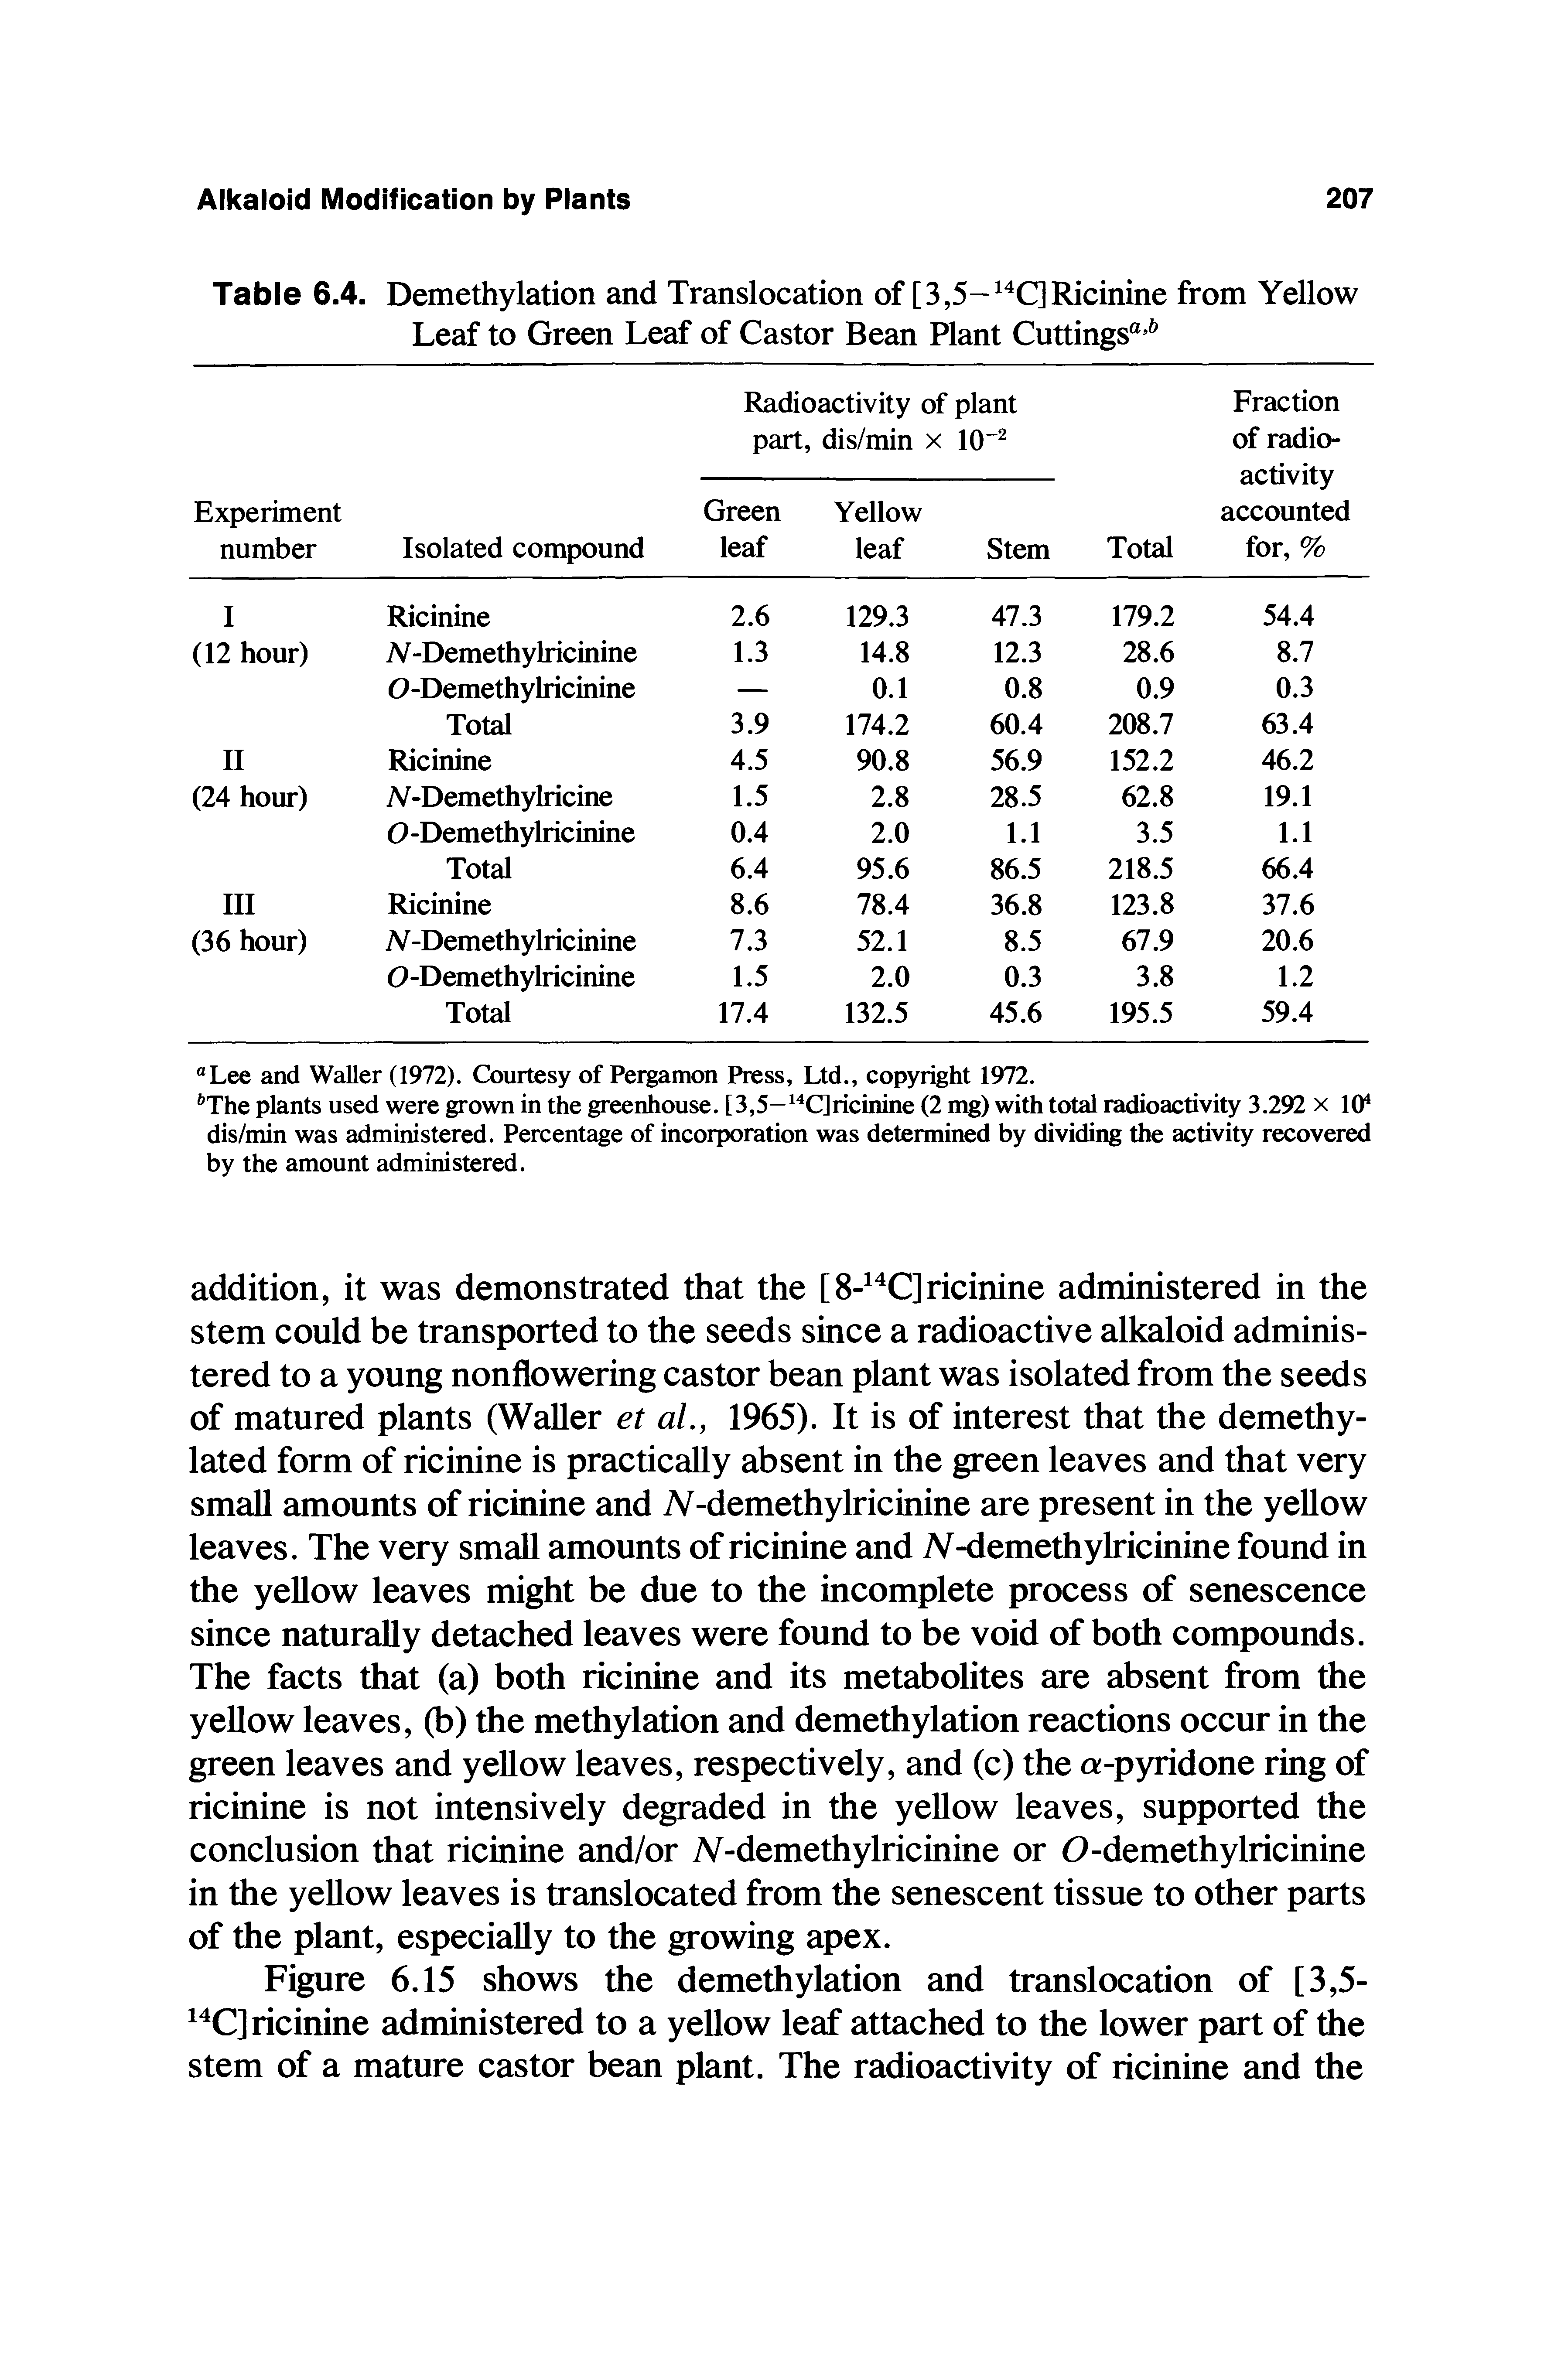 Table 6.4. Demethylation and Translocation of [3,5- C]Ricinine from Yellow Leaf to Green Leaf of Castor Bean Plant Cuttings ...